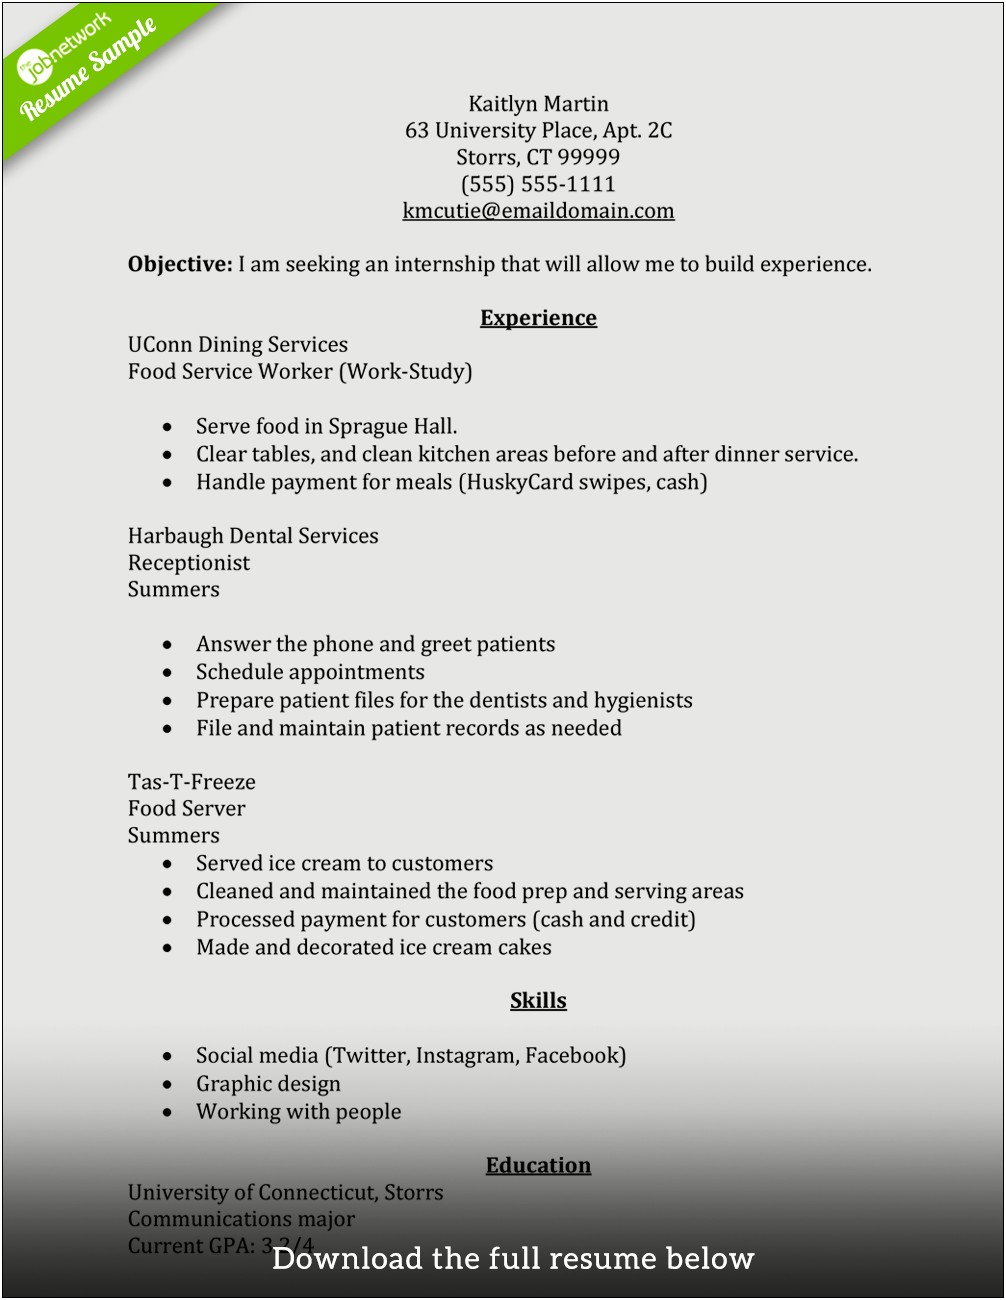 Work Experience Section Of Resume Example